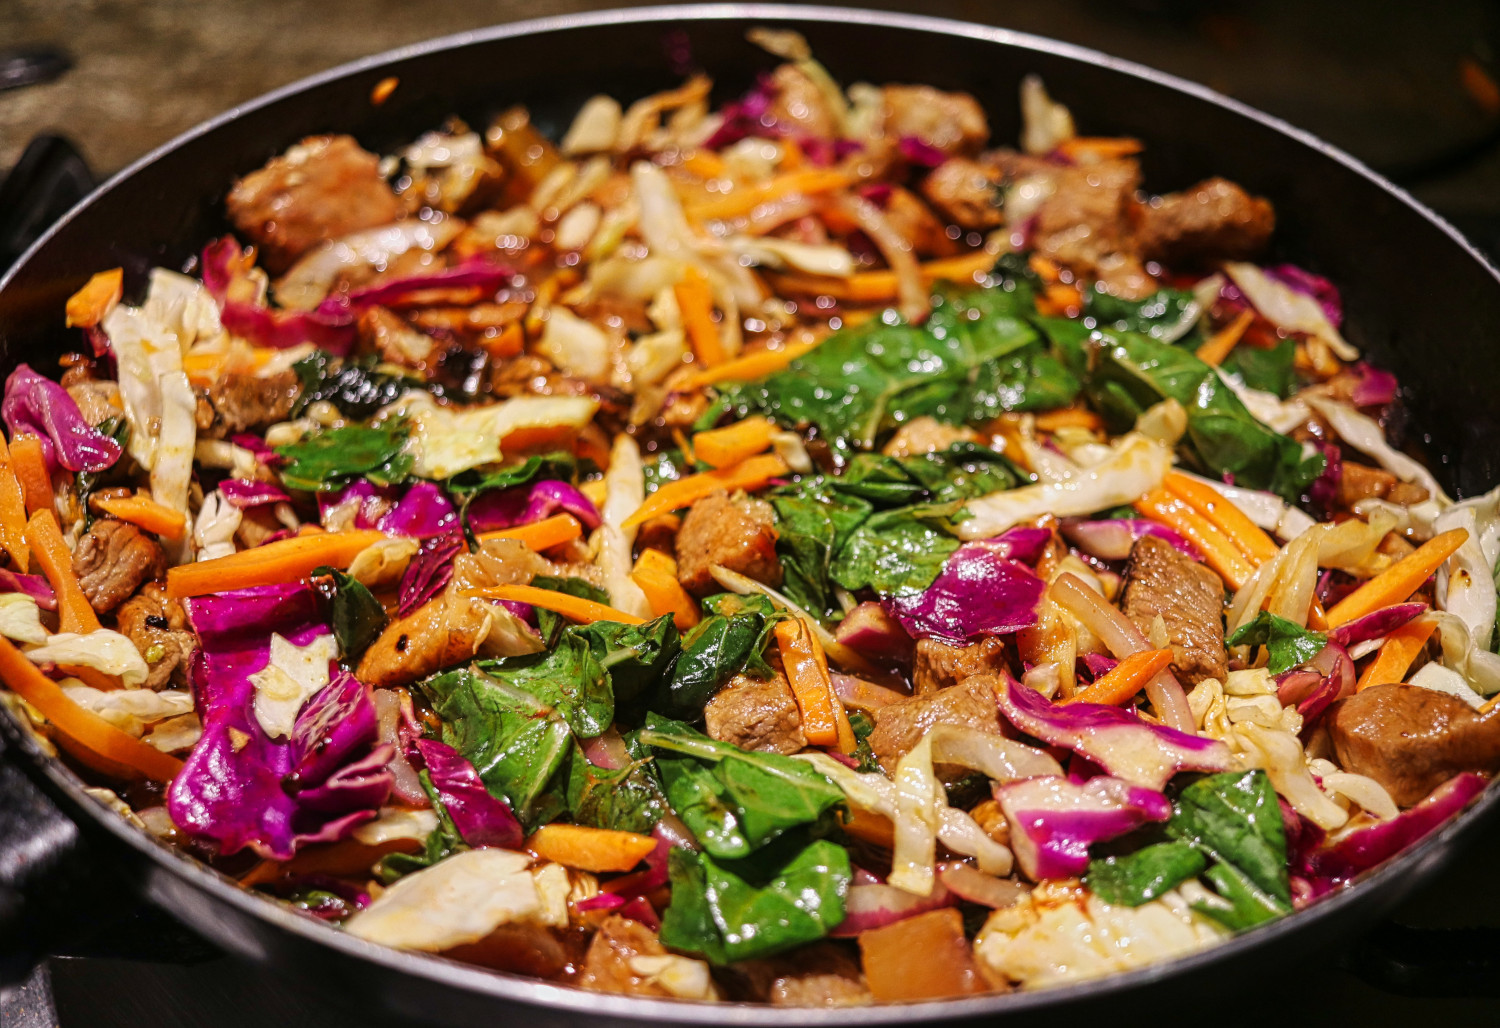 A pot of beef stir fry with carrots, spinach, and red onion - Healthy Food Options for Seniors - Focus Care